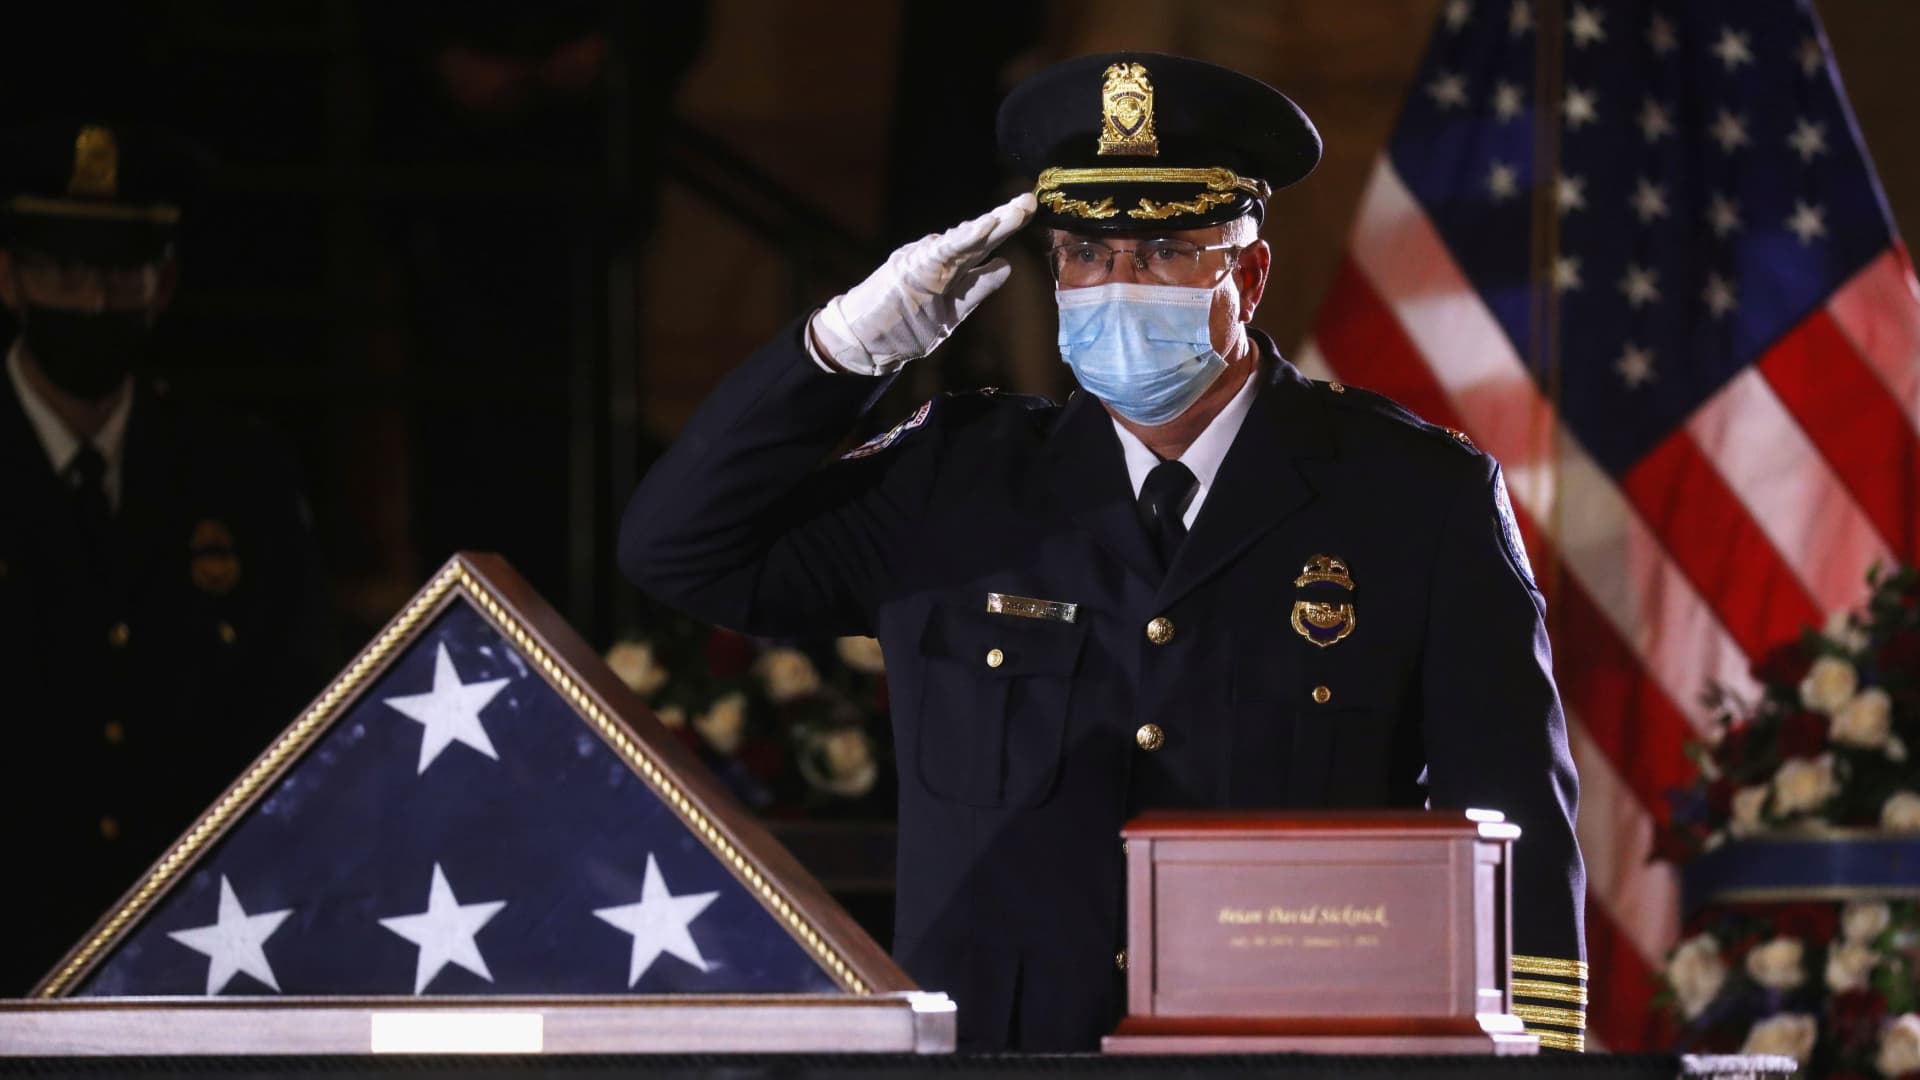 A U.S. Capitol Police Officer pays his respects to fellow officer Brian Sicknick, who died on January 7 from injuries he sustained while protecting the U.S. Capitol during the January 6 attack on the building, as he lies in honor in the Capitol Rotunda at the U.S. Capitol in Washington, U.S., February 2, 2021.